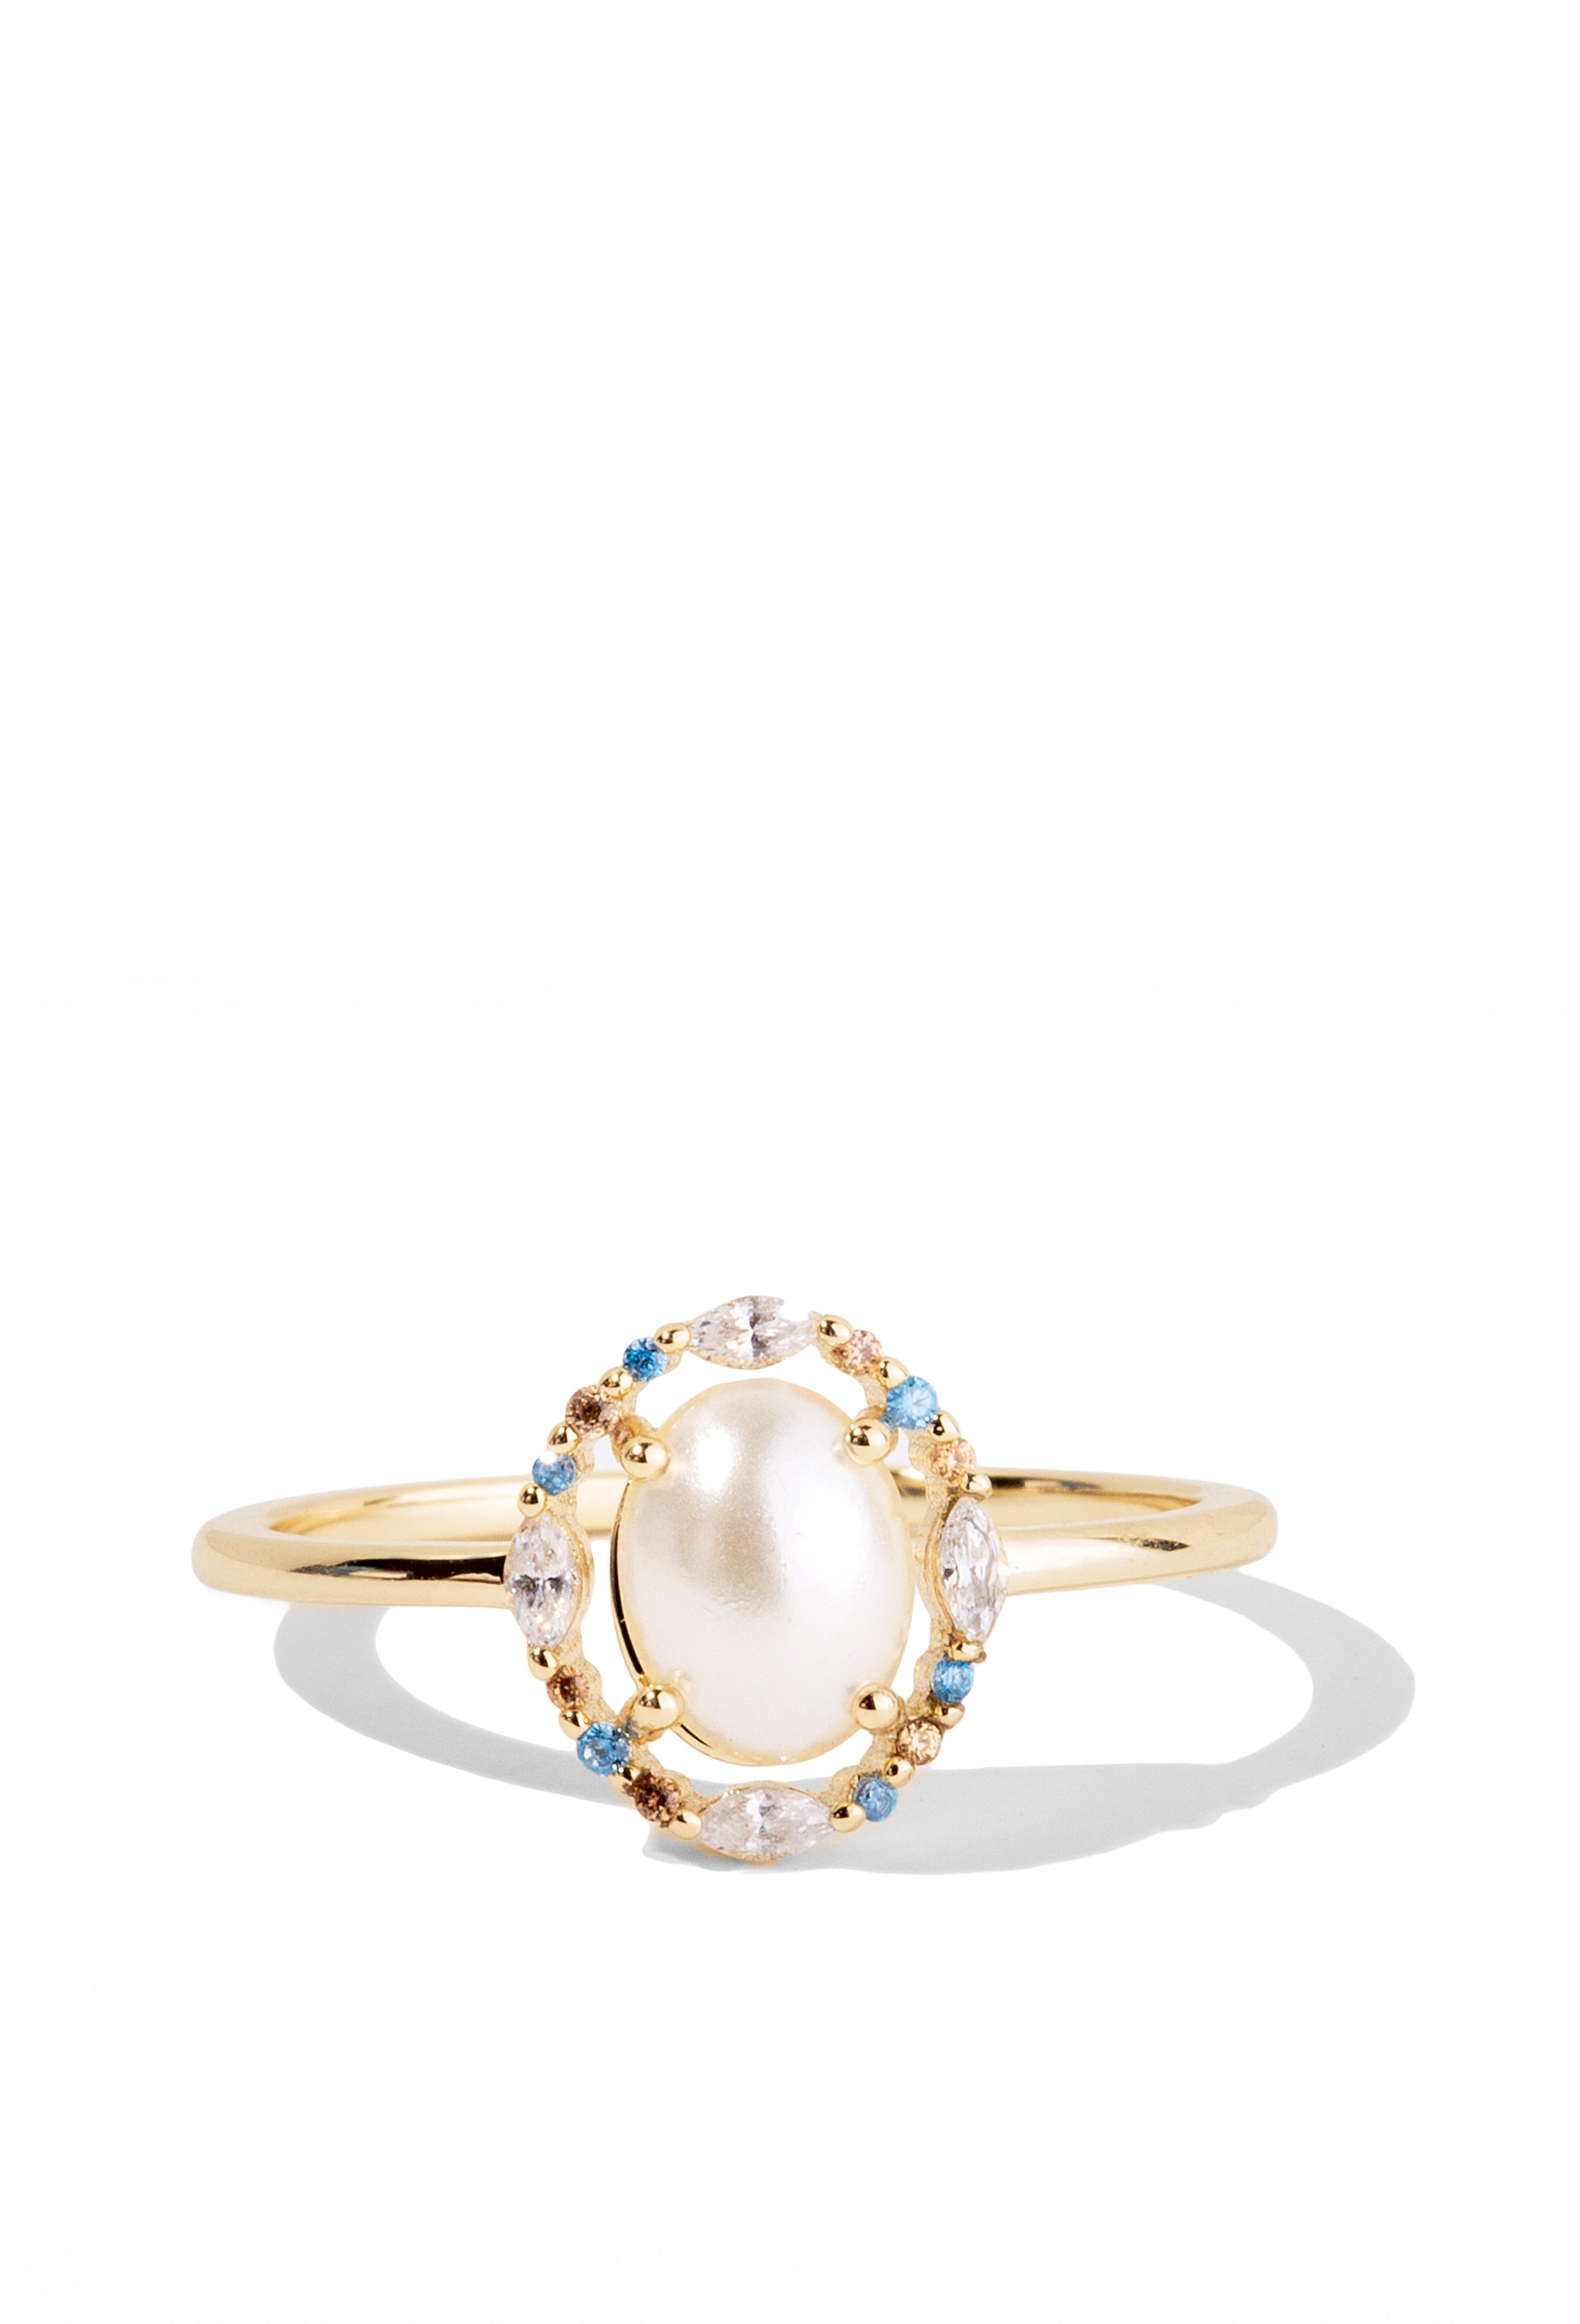 Gold Ring Featuring a Pearl Crystal + Halo of Blue, Peach, White Crystals | Kyoto by Oomiay